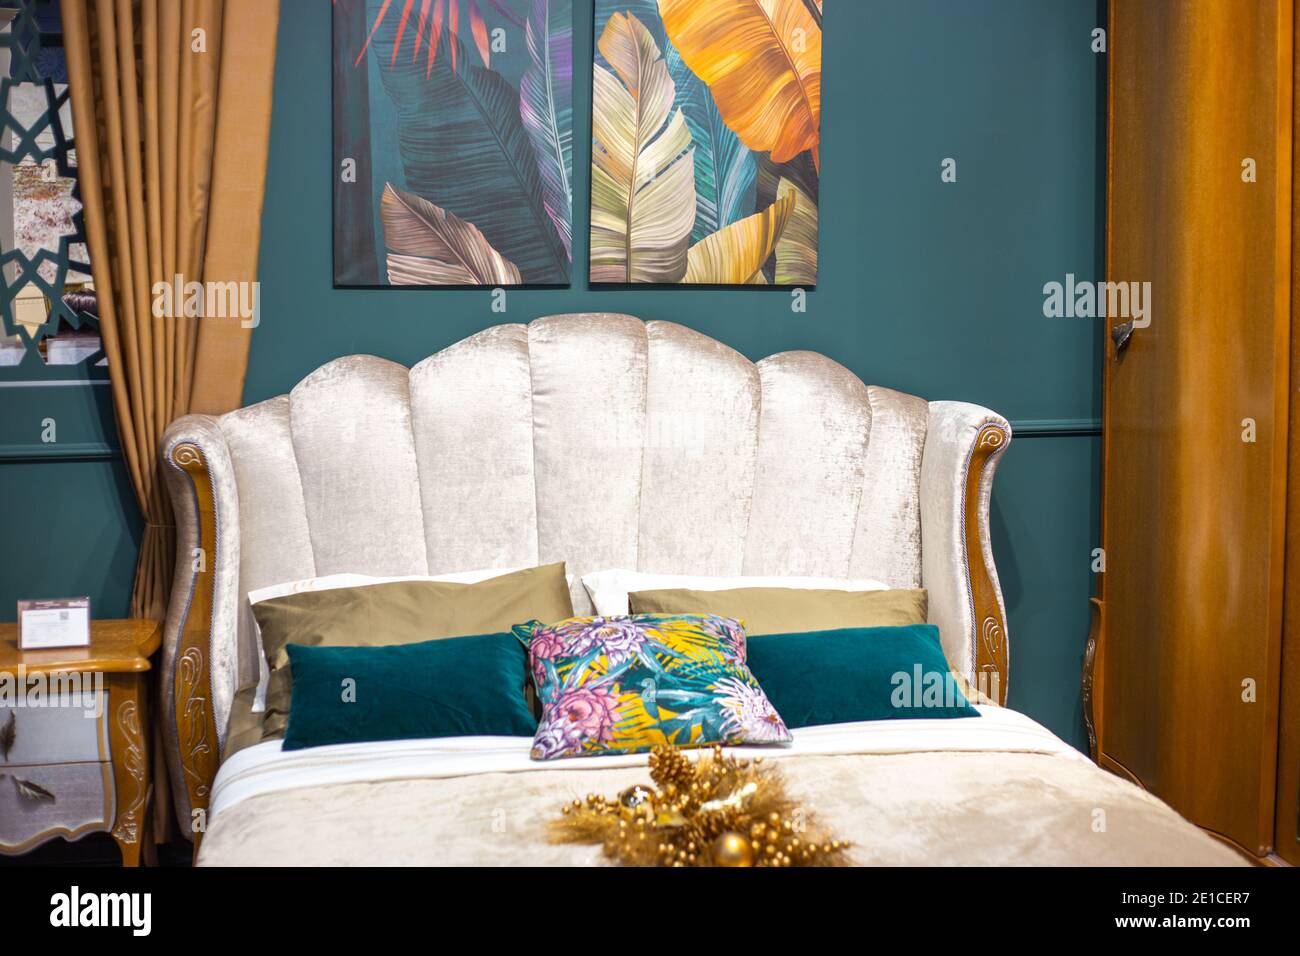 Bedroom interior. Headboard of large bed with many pillows. Furniture store  Stock Photo - Alamy